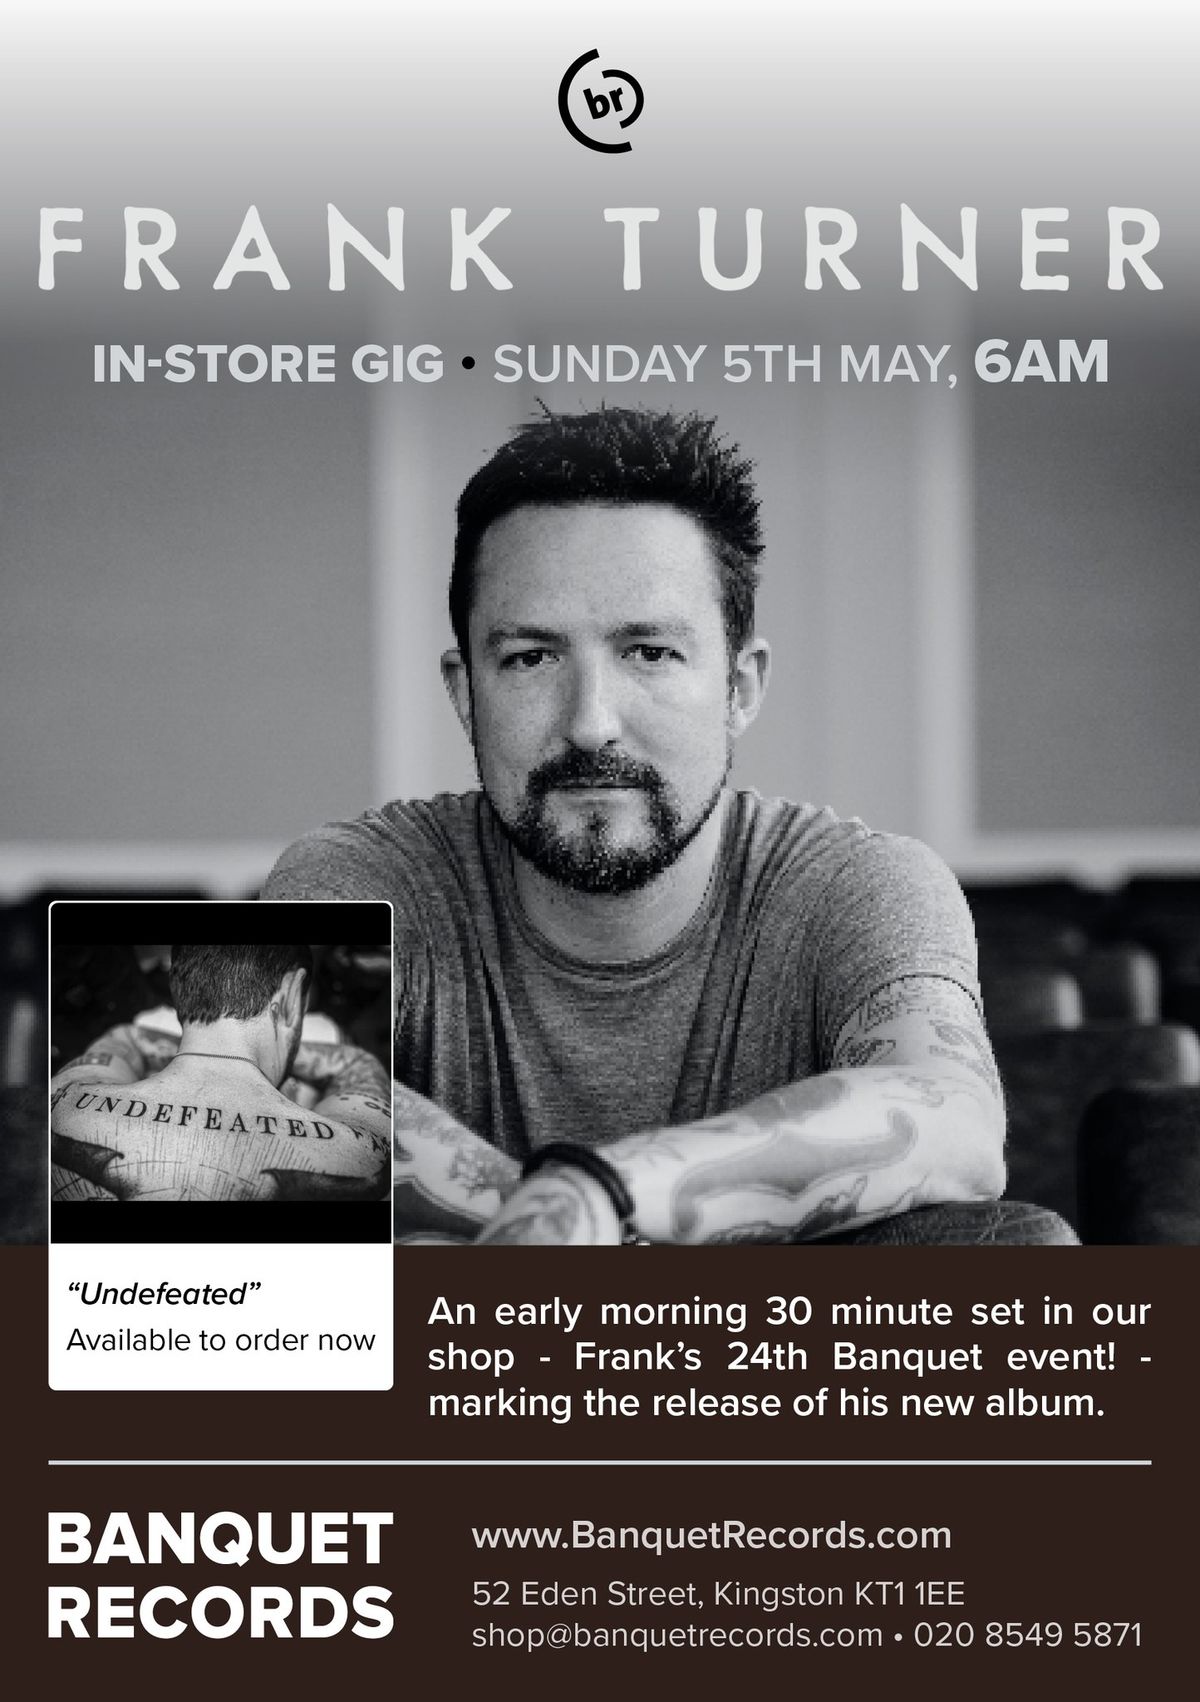 Frank Turner in-store at Banquet Records